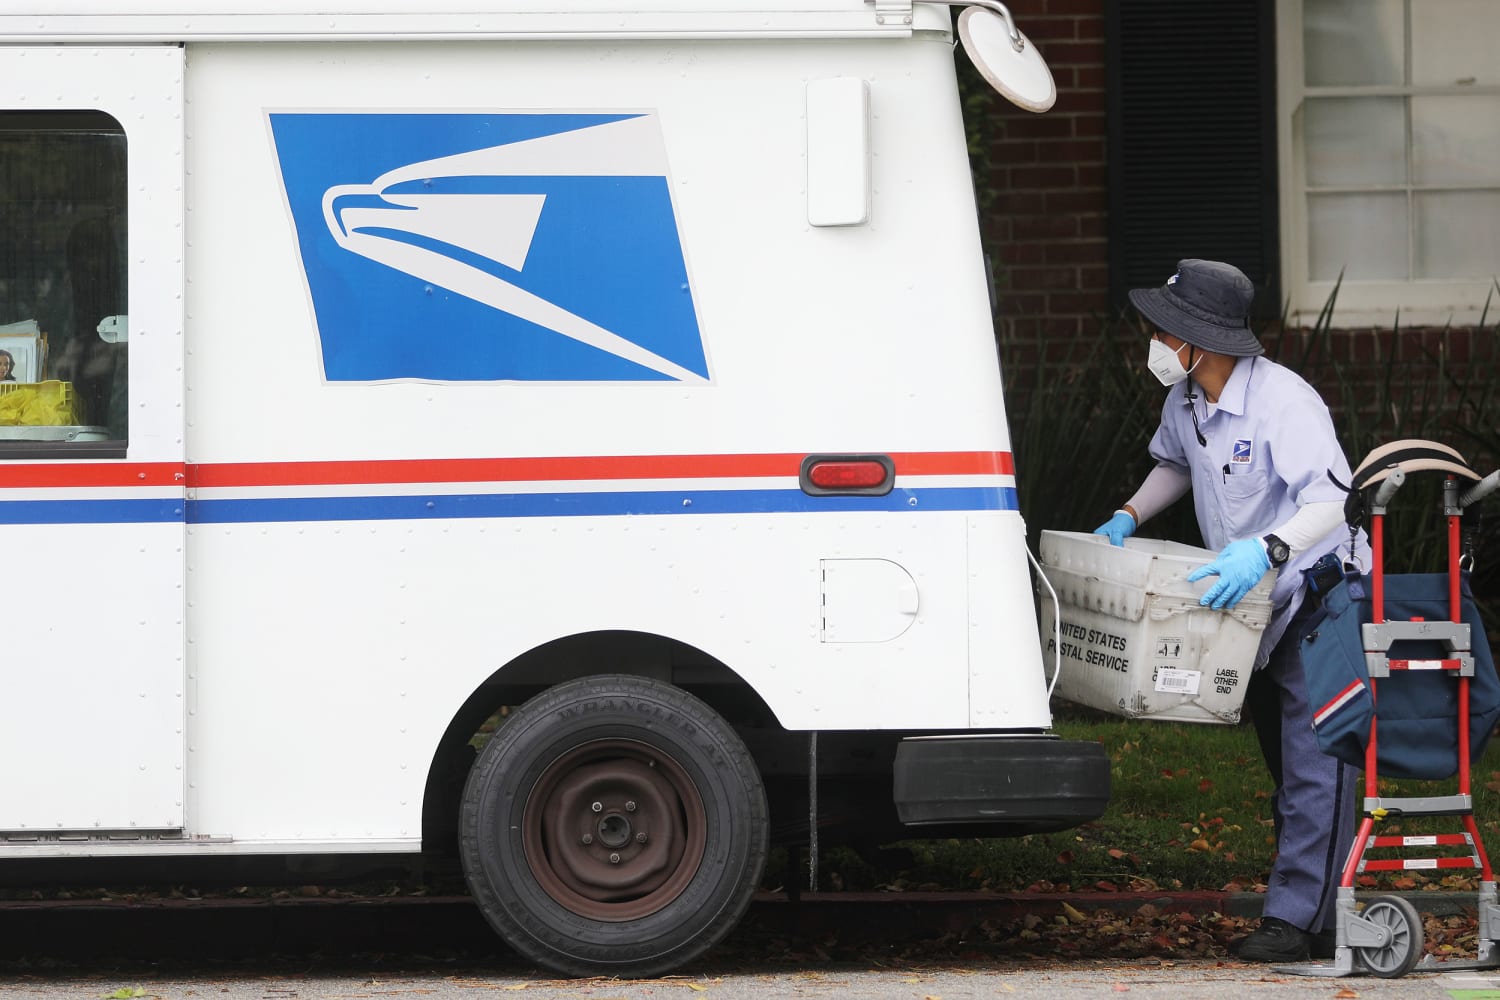 Postal Service requests temporary exemption from Biden’s vaccine rule